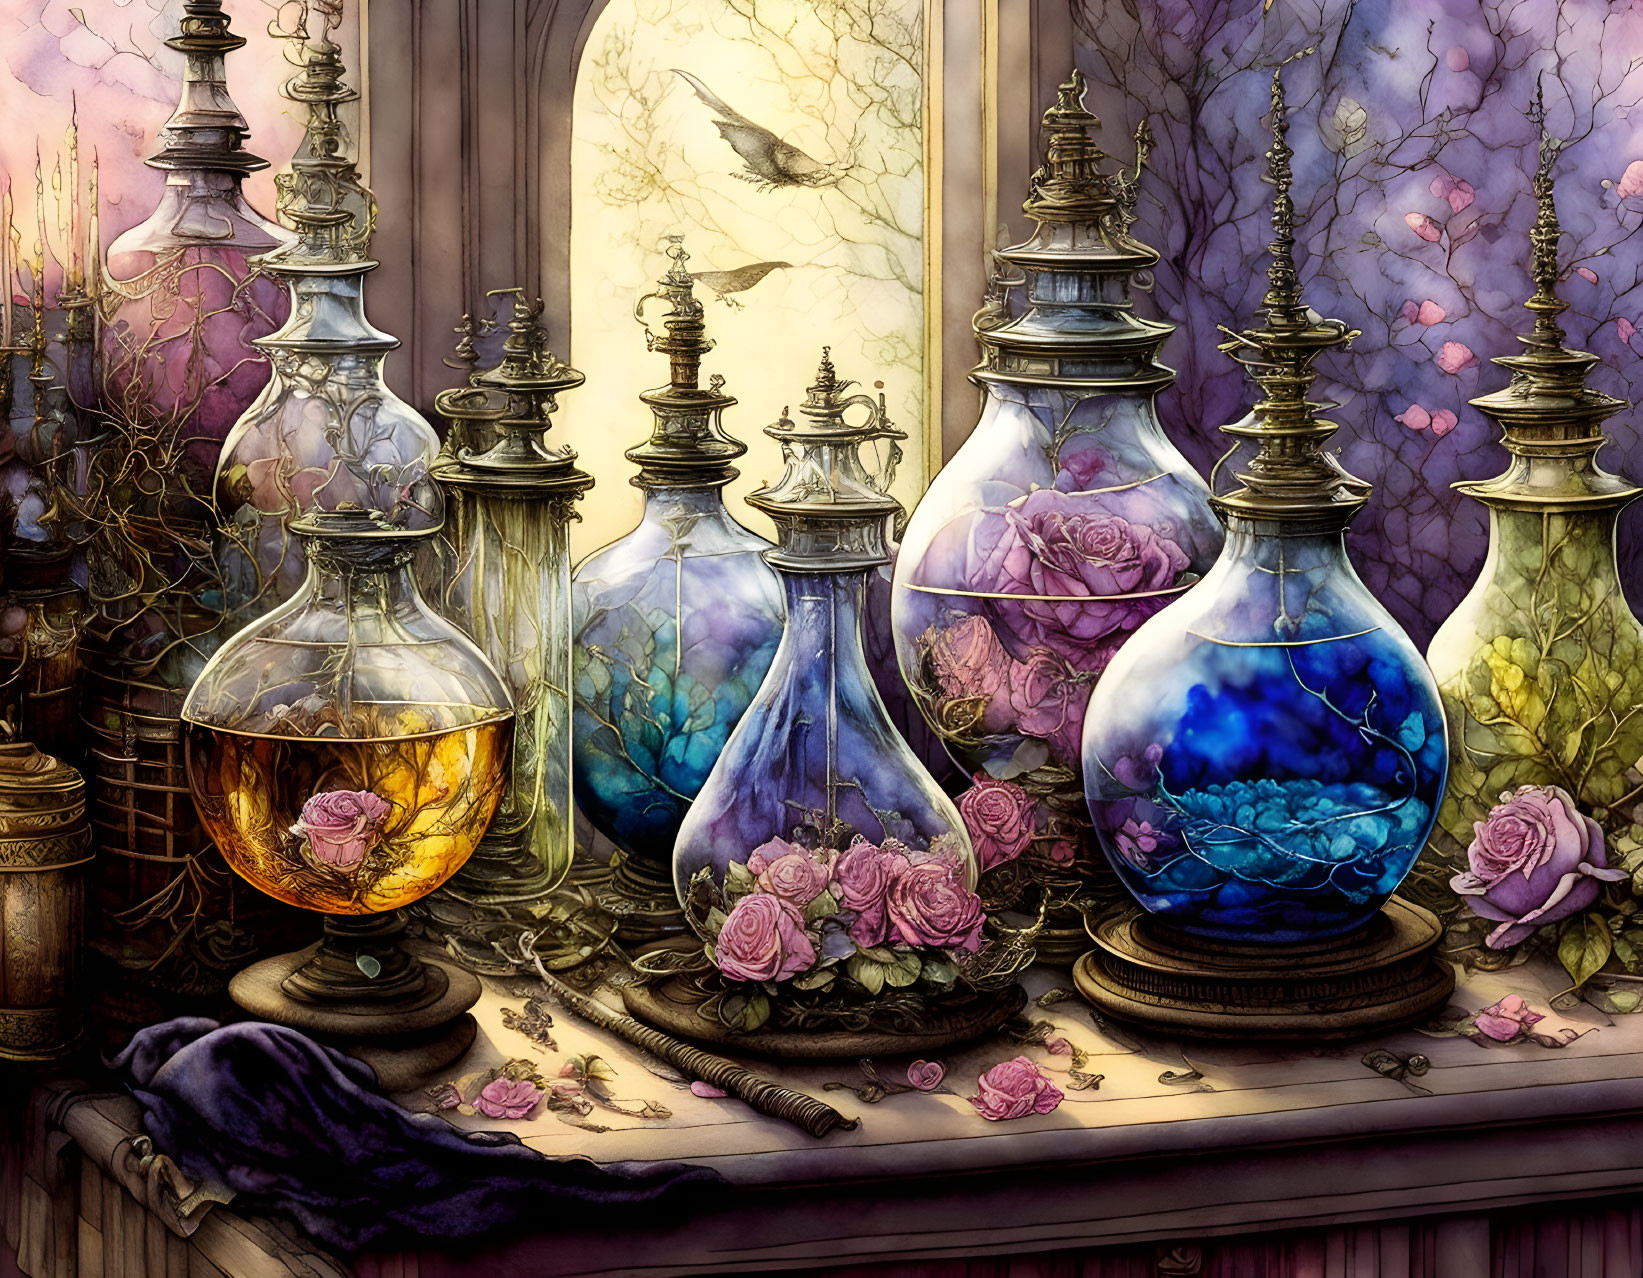 Whimsical still life with ornate glass bottles, roses, bird, and twilight sky